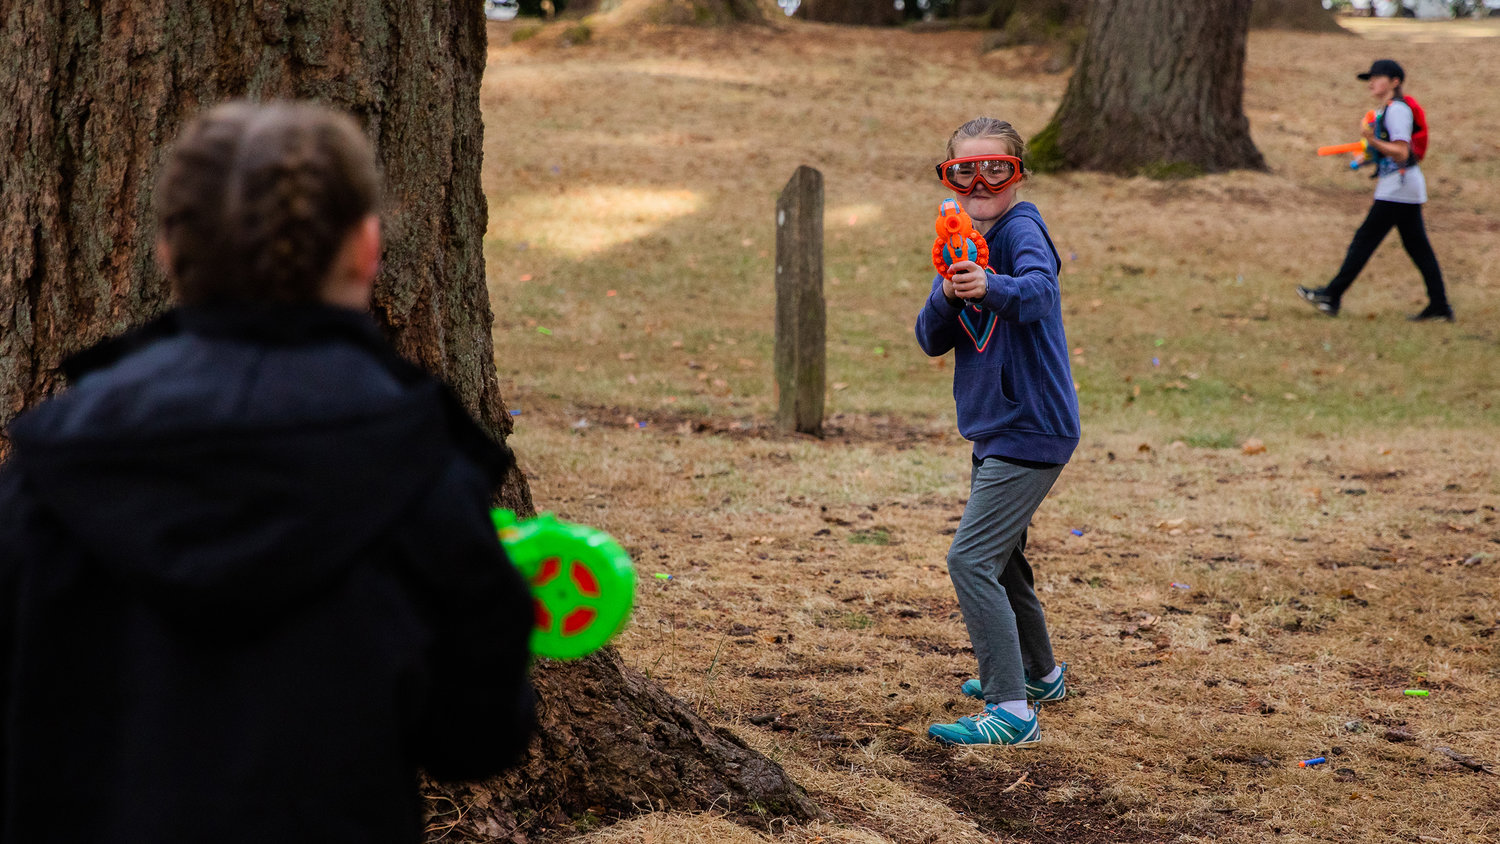 Eye protection is worn as visitors commence in a Nerf War at Borst Park in Centralia on Sunday.